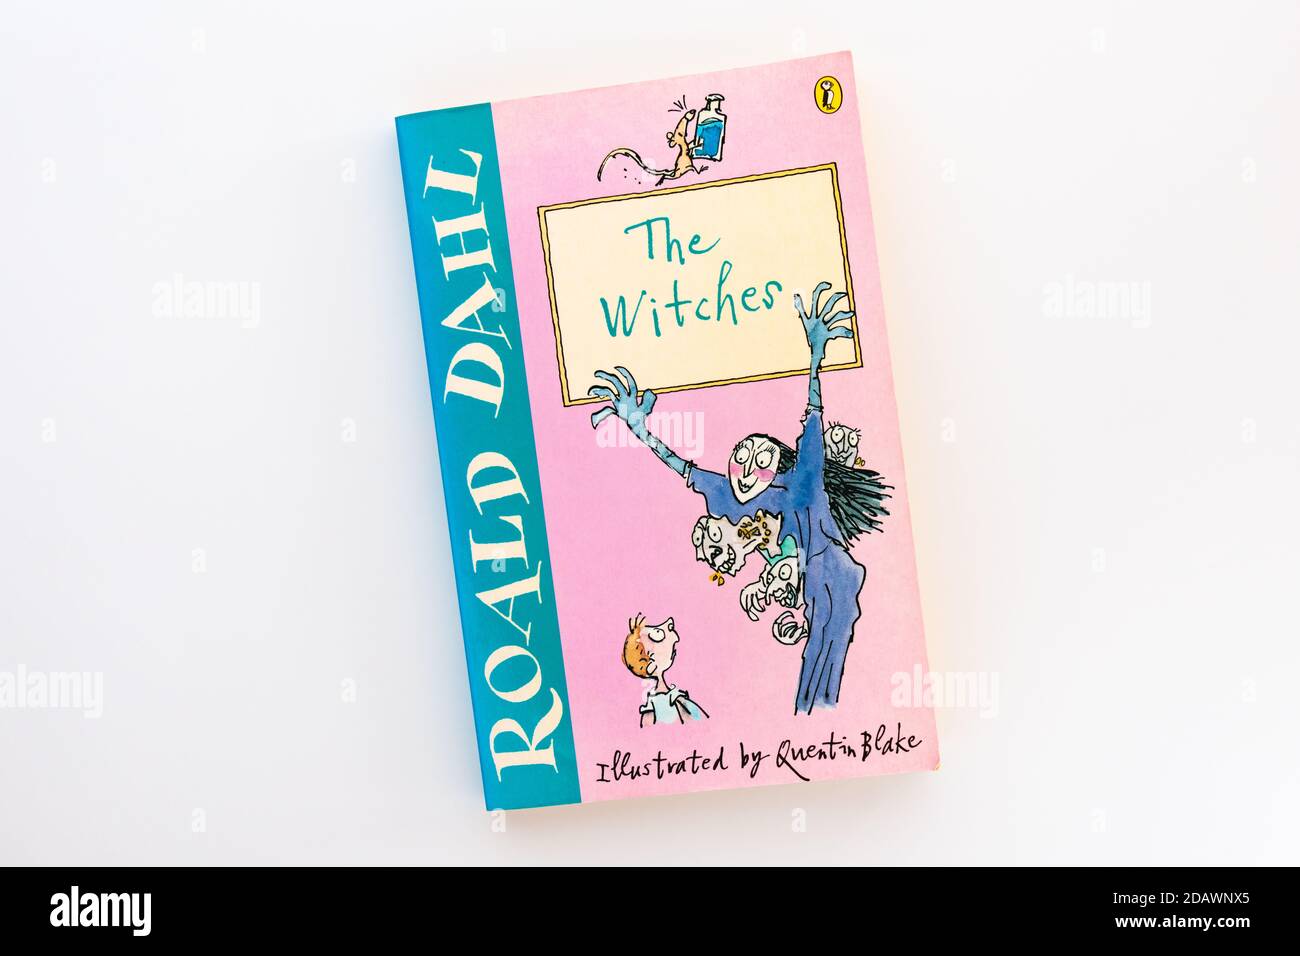 the witches roald dahl book pictures